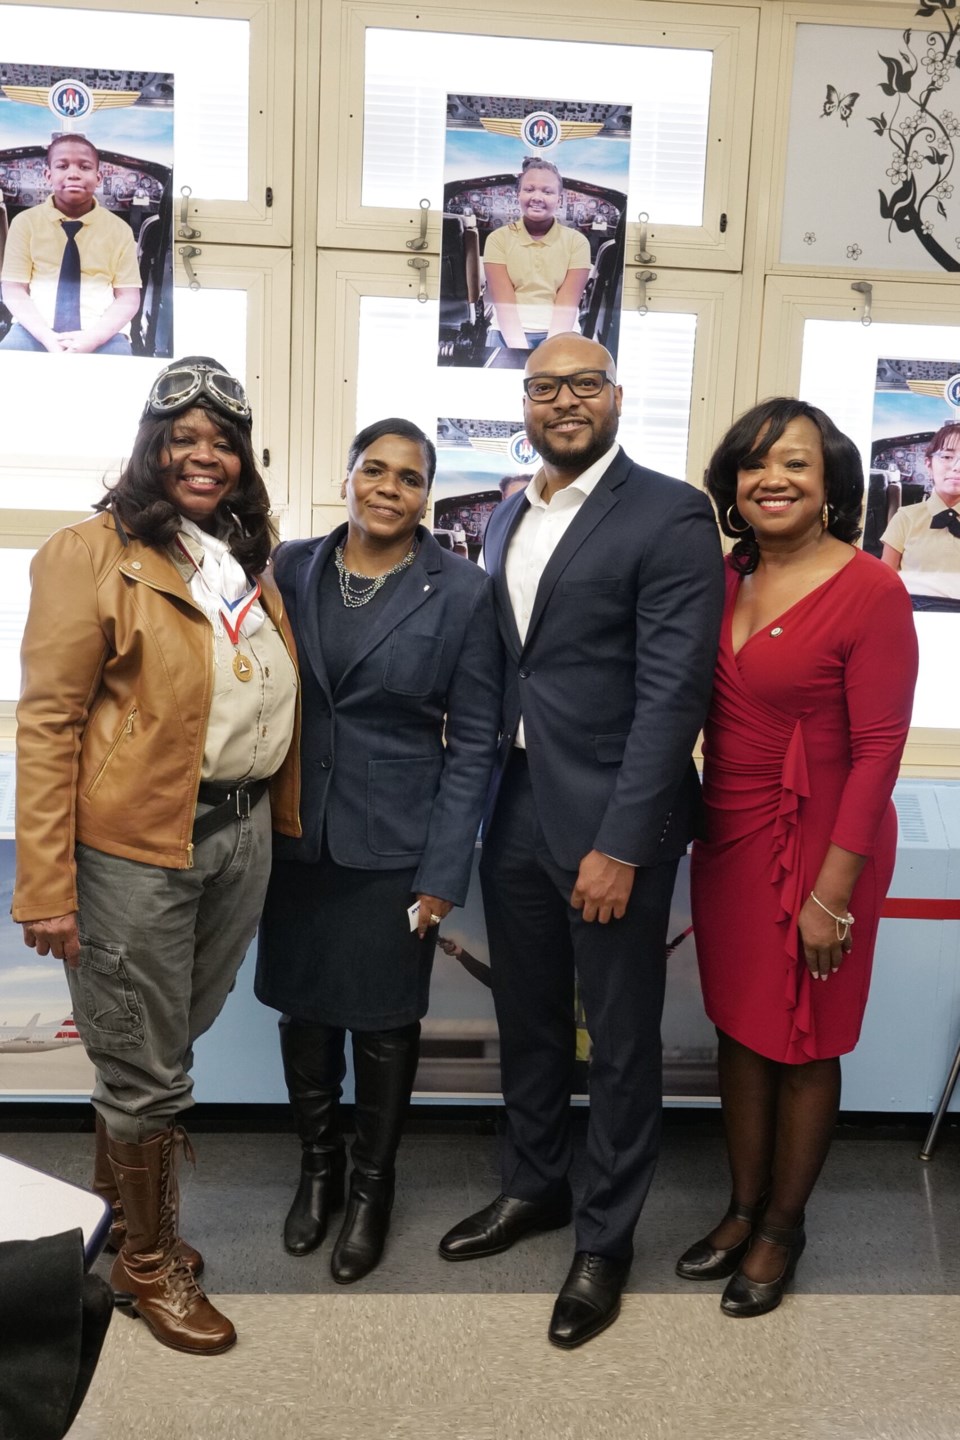 Pictured left to right: Gigi Coleman, great-niece of Bessie Coleman; Principal Lena Gates, P.S. 5; Jaime Gates, American Airlines senior analyst; Darlene Mealy, City council member.  Photo: Provided/P.S. 5.